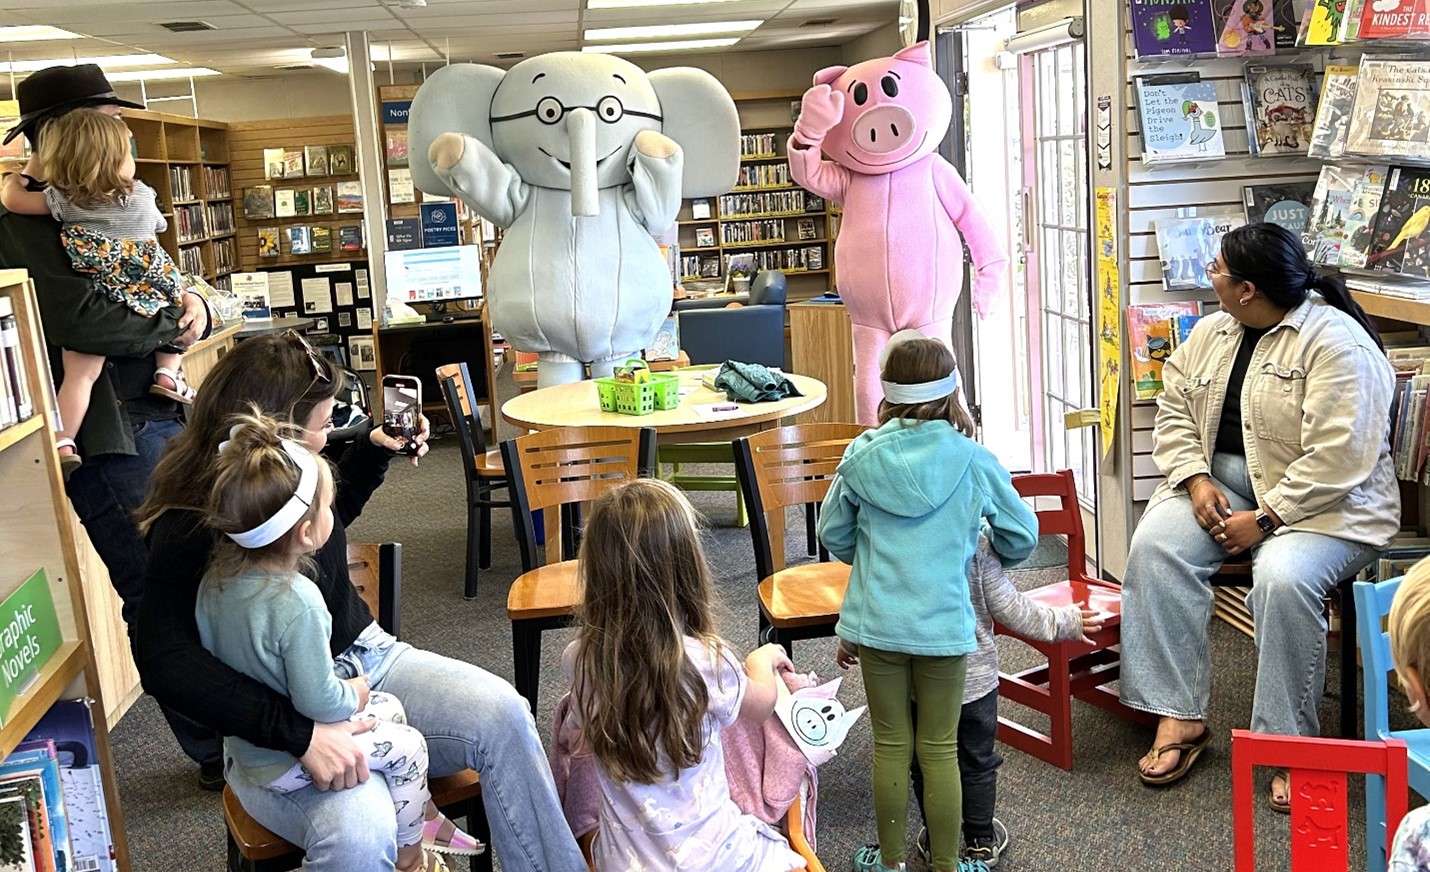 Image showing mascots in elephant and pig costumes waving to children at the Santa Margarita Library